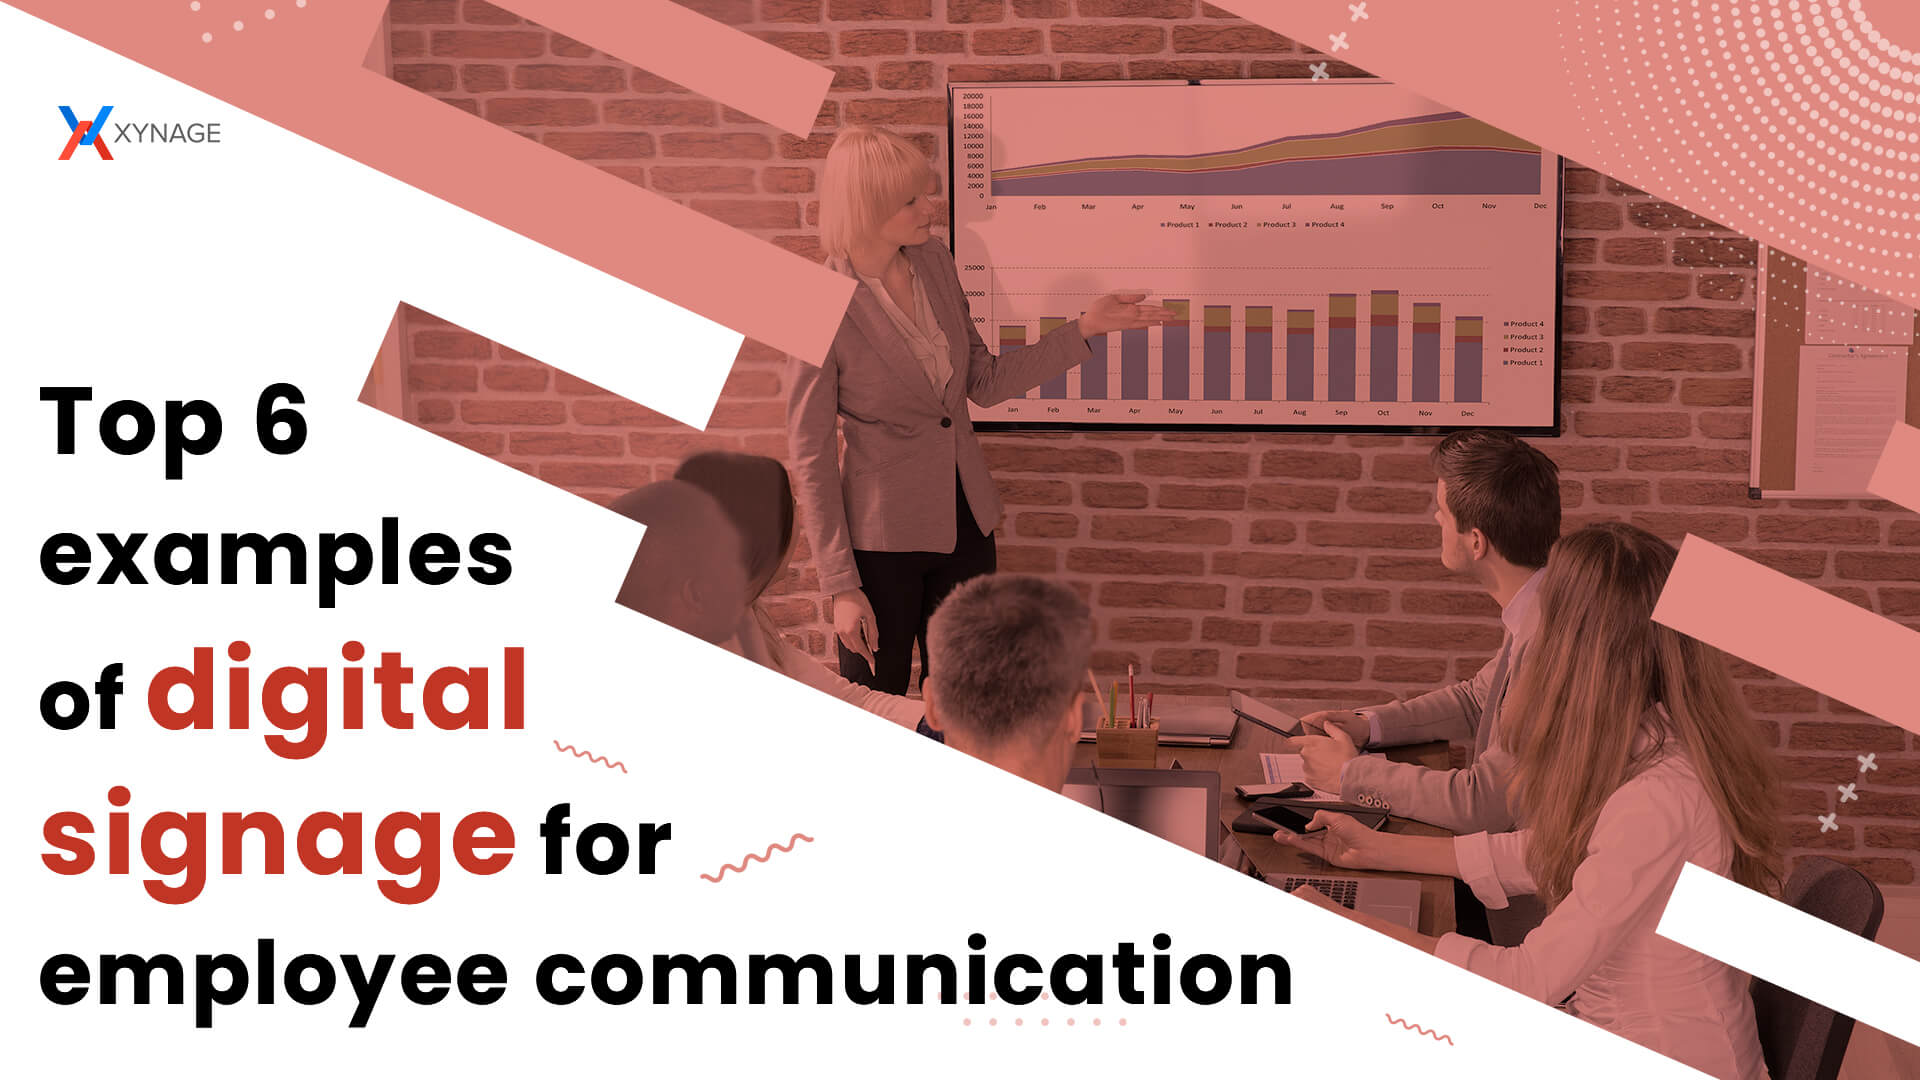 Top 6 examples of digital signage for employee communication